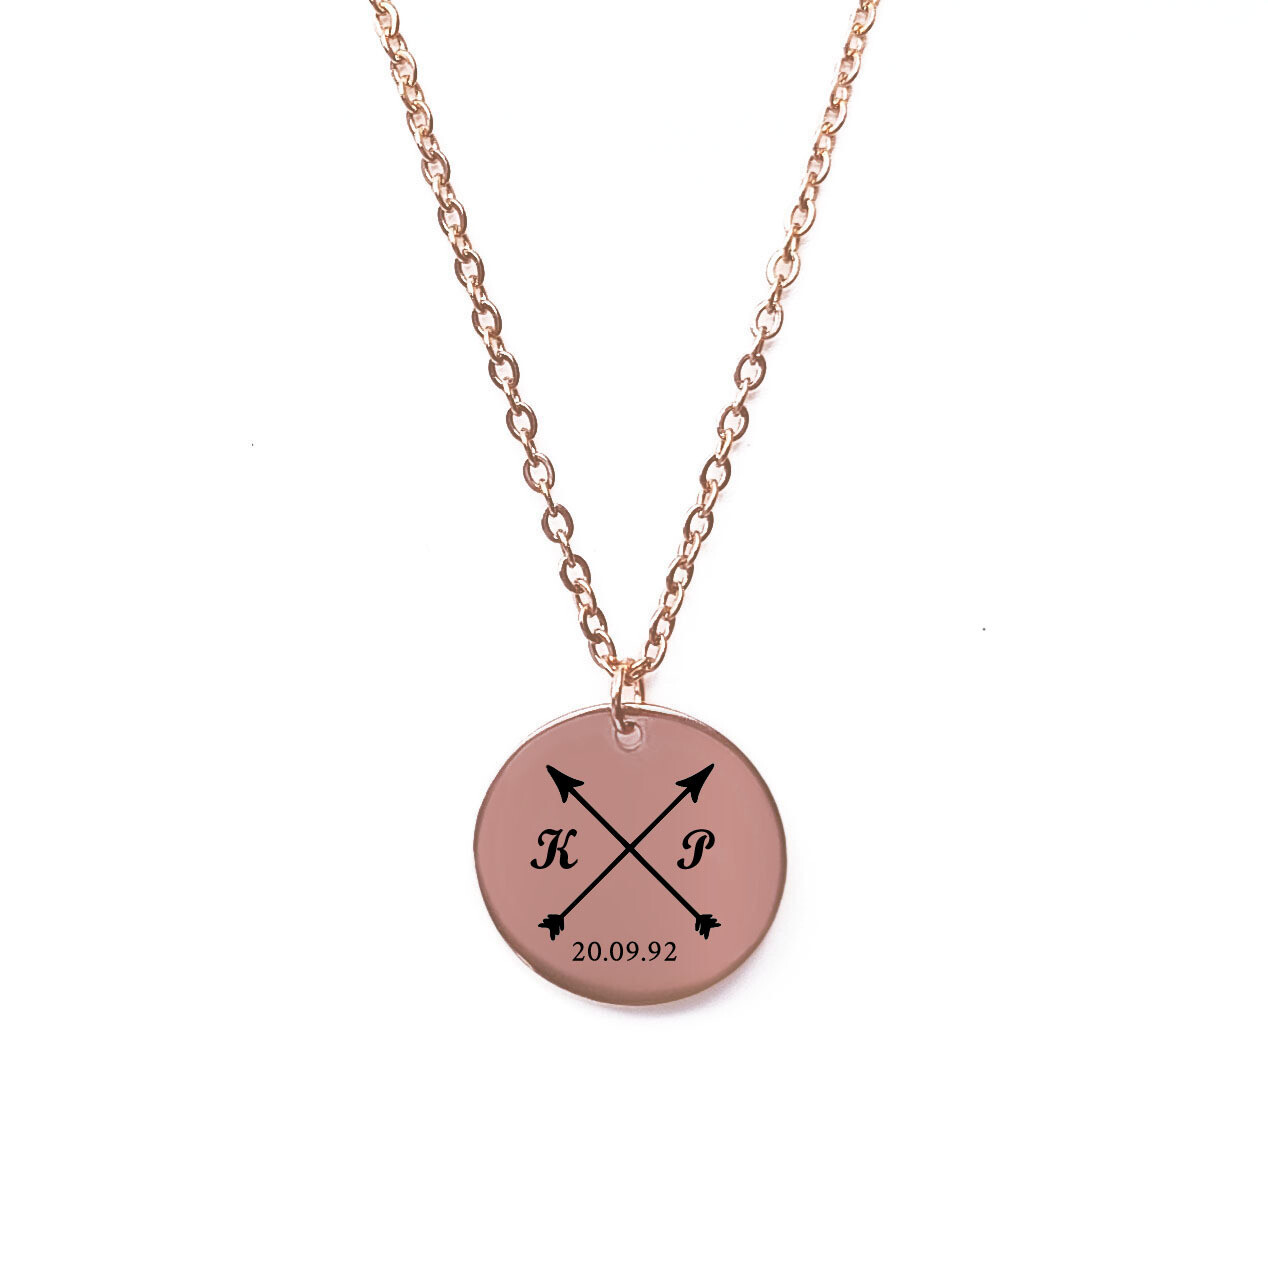 Personalised Engraved Initials Rose Gold Necklace